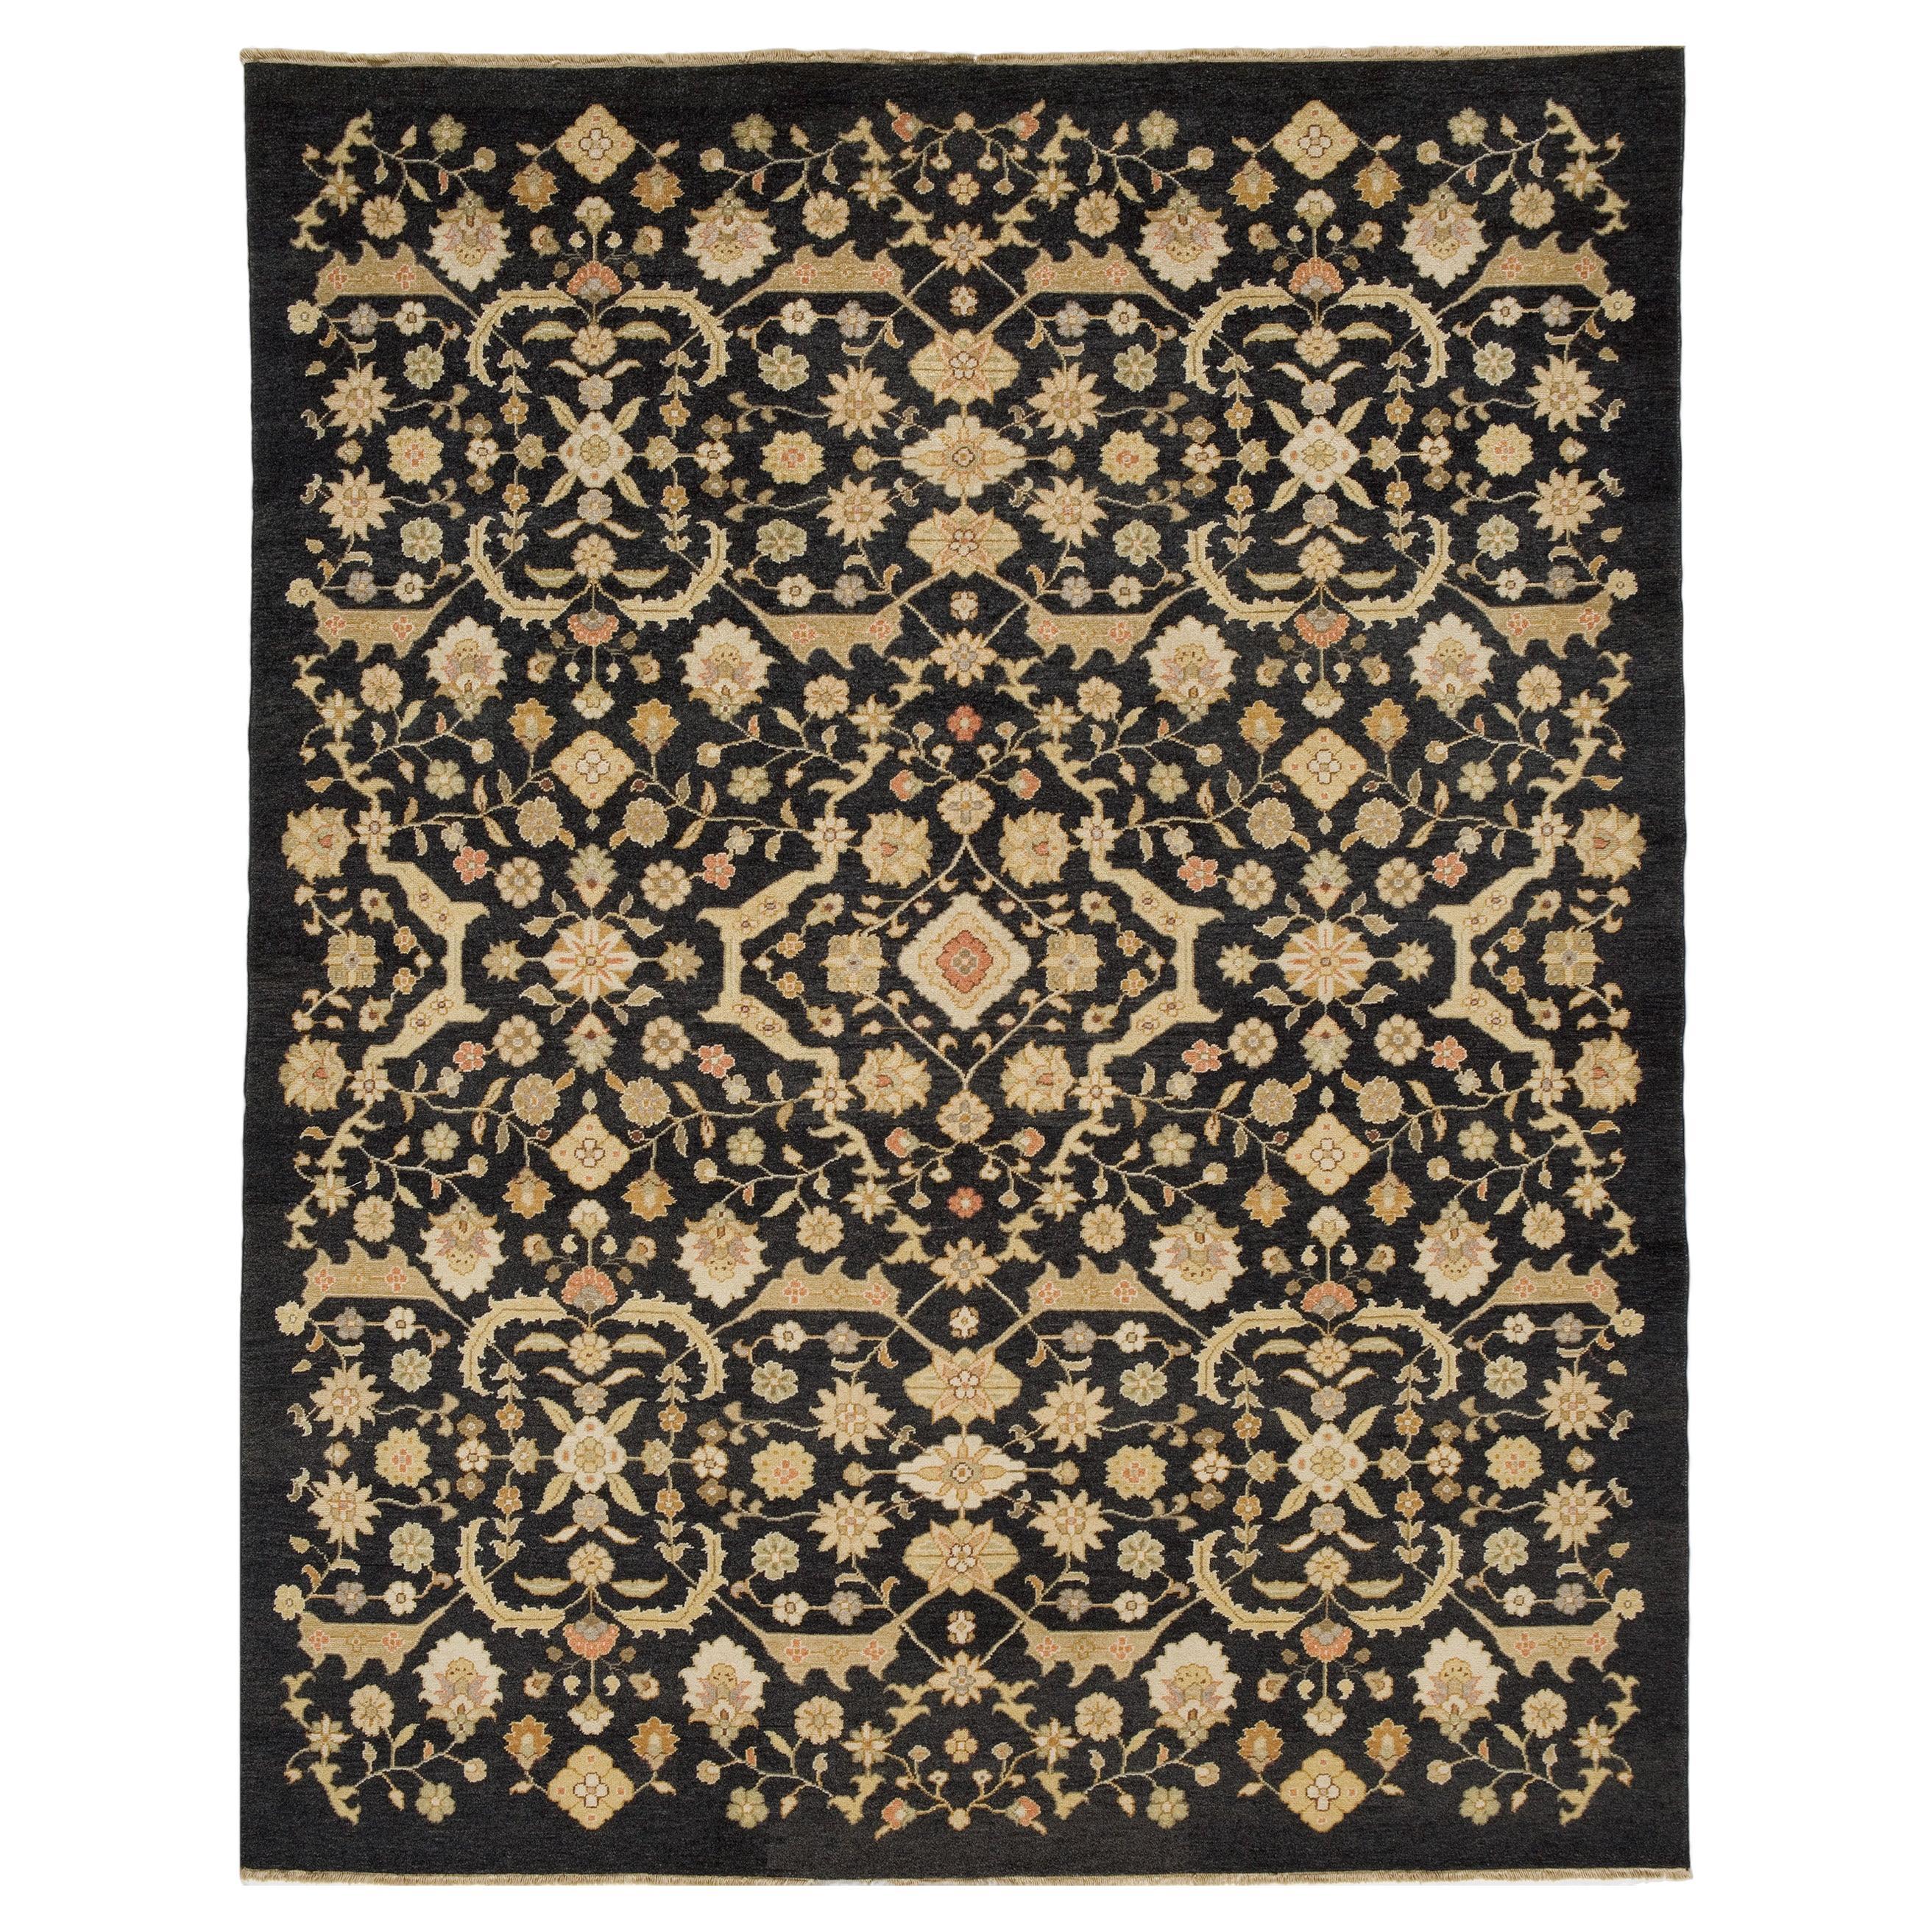 Luxury Traditional Hand-Knotted Ferrahan Black 10x14 Rug